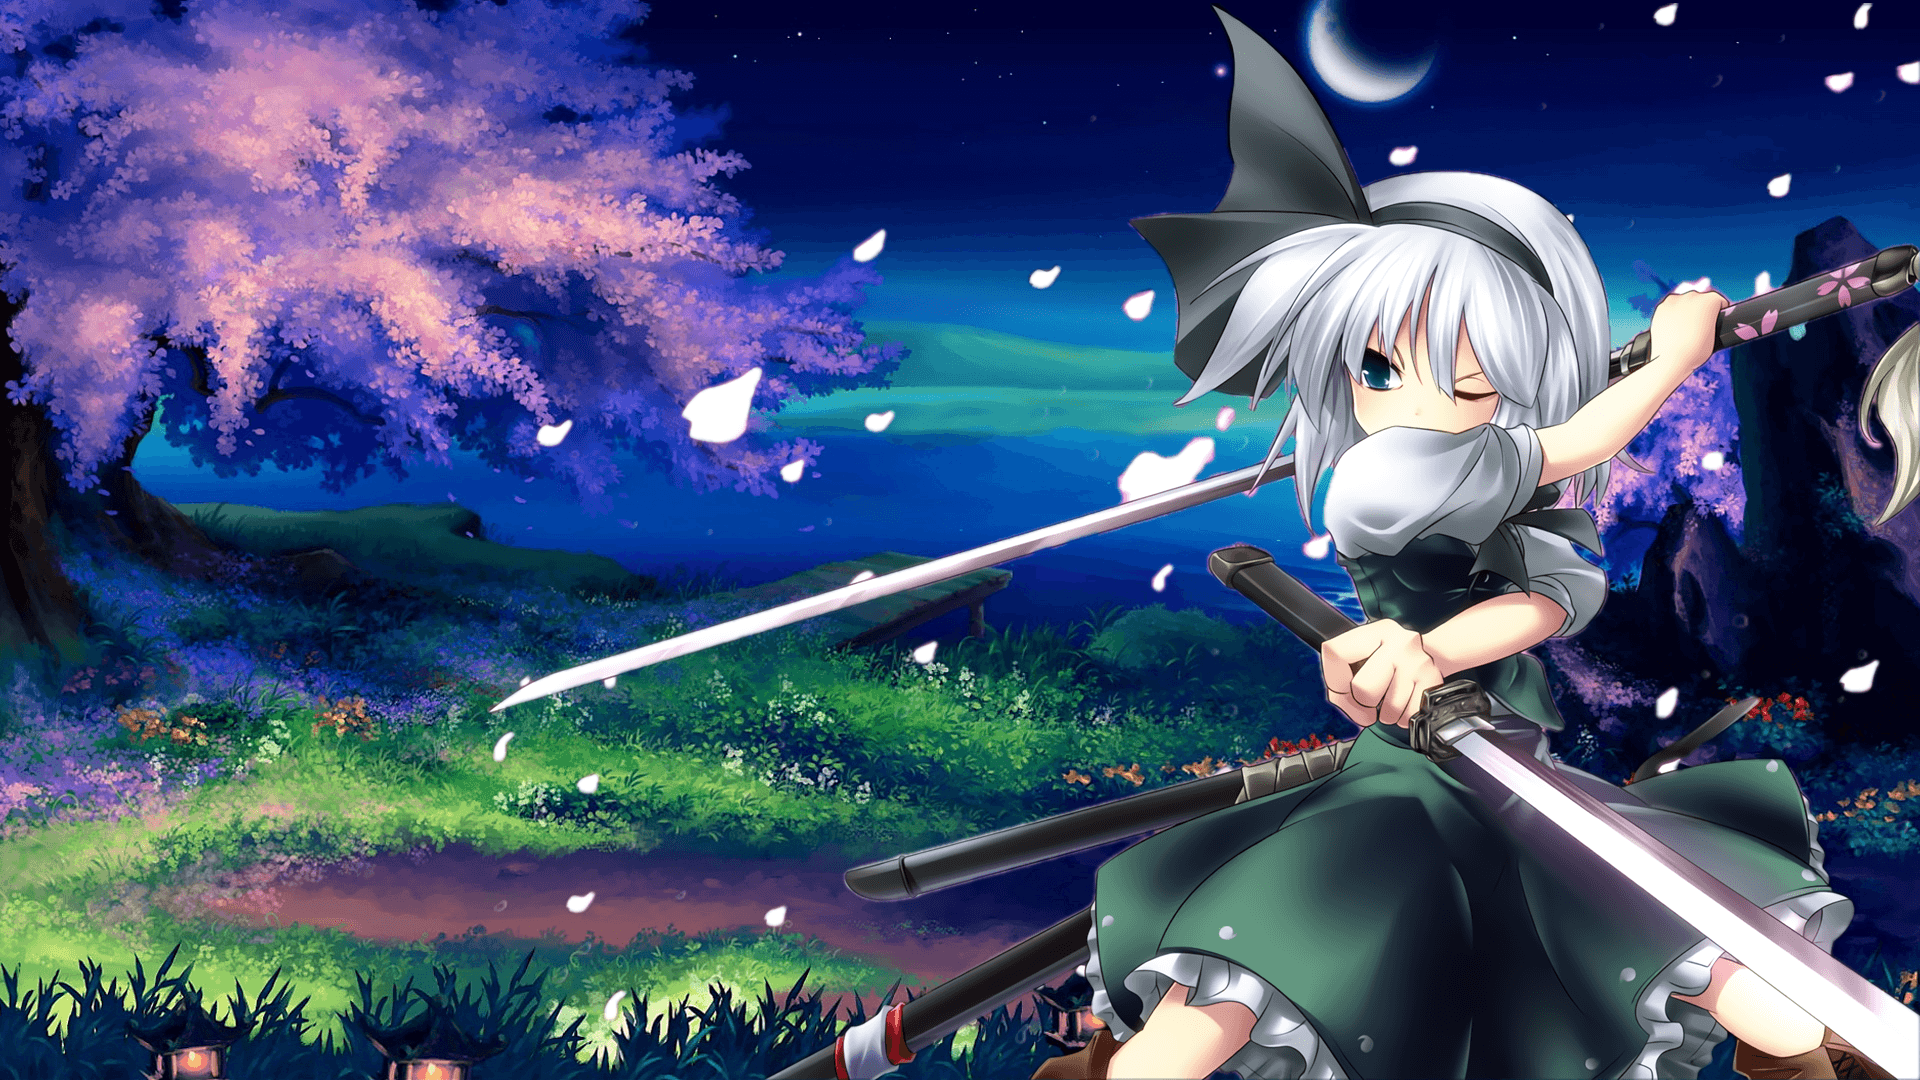 Wallpaper for best girl Youmu. Touhou Project (東方Project). Know